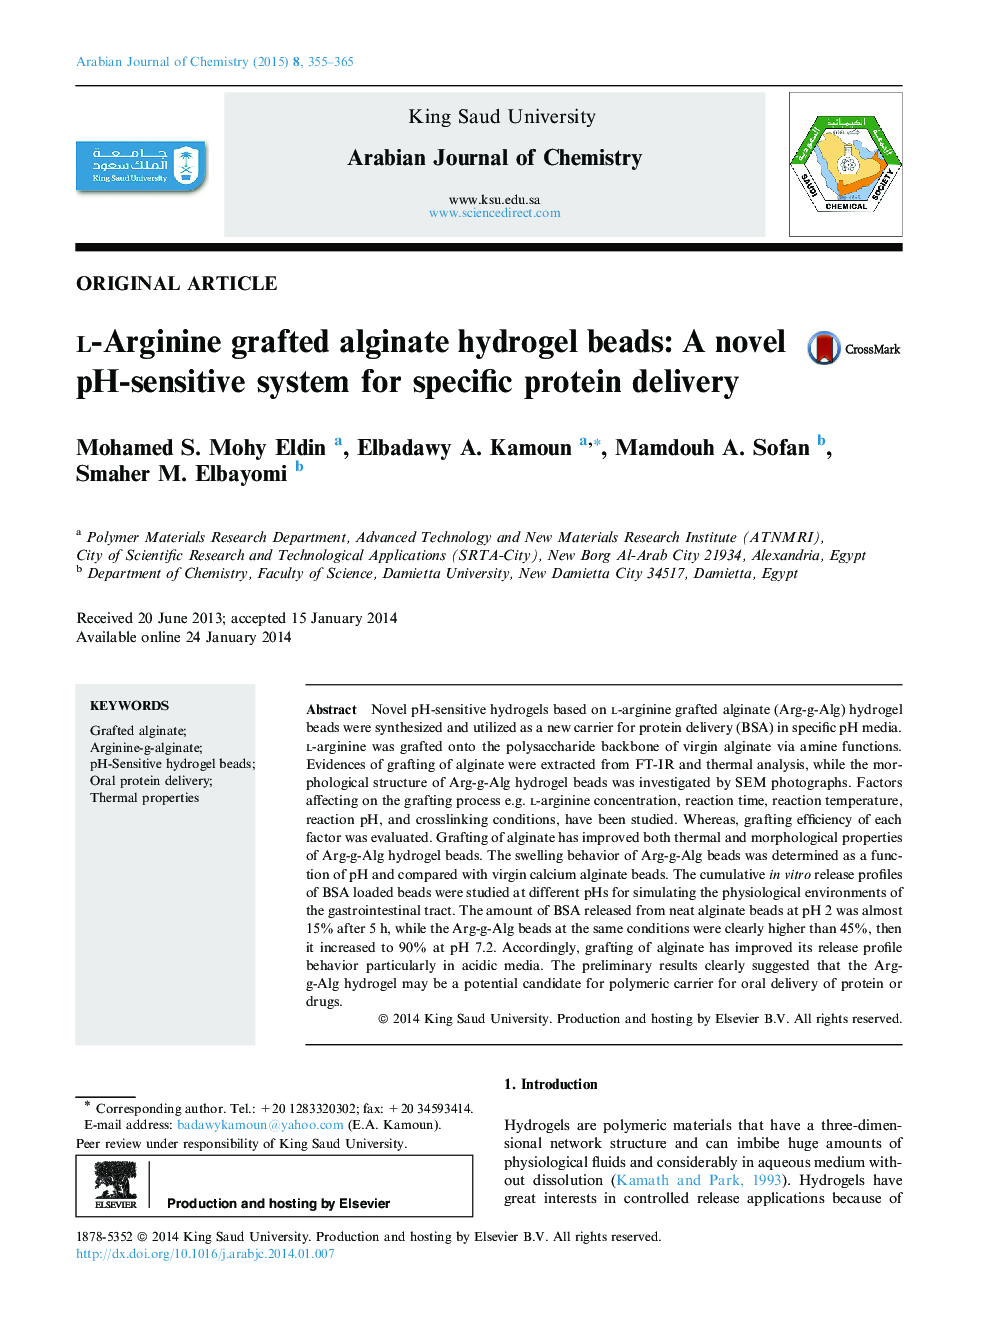 l-Arginine grafted alginate hydrogel beads: A novel pH-sensitive system for specific protein delivery 